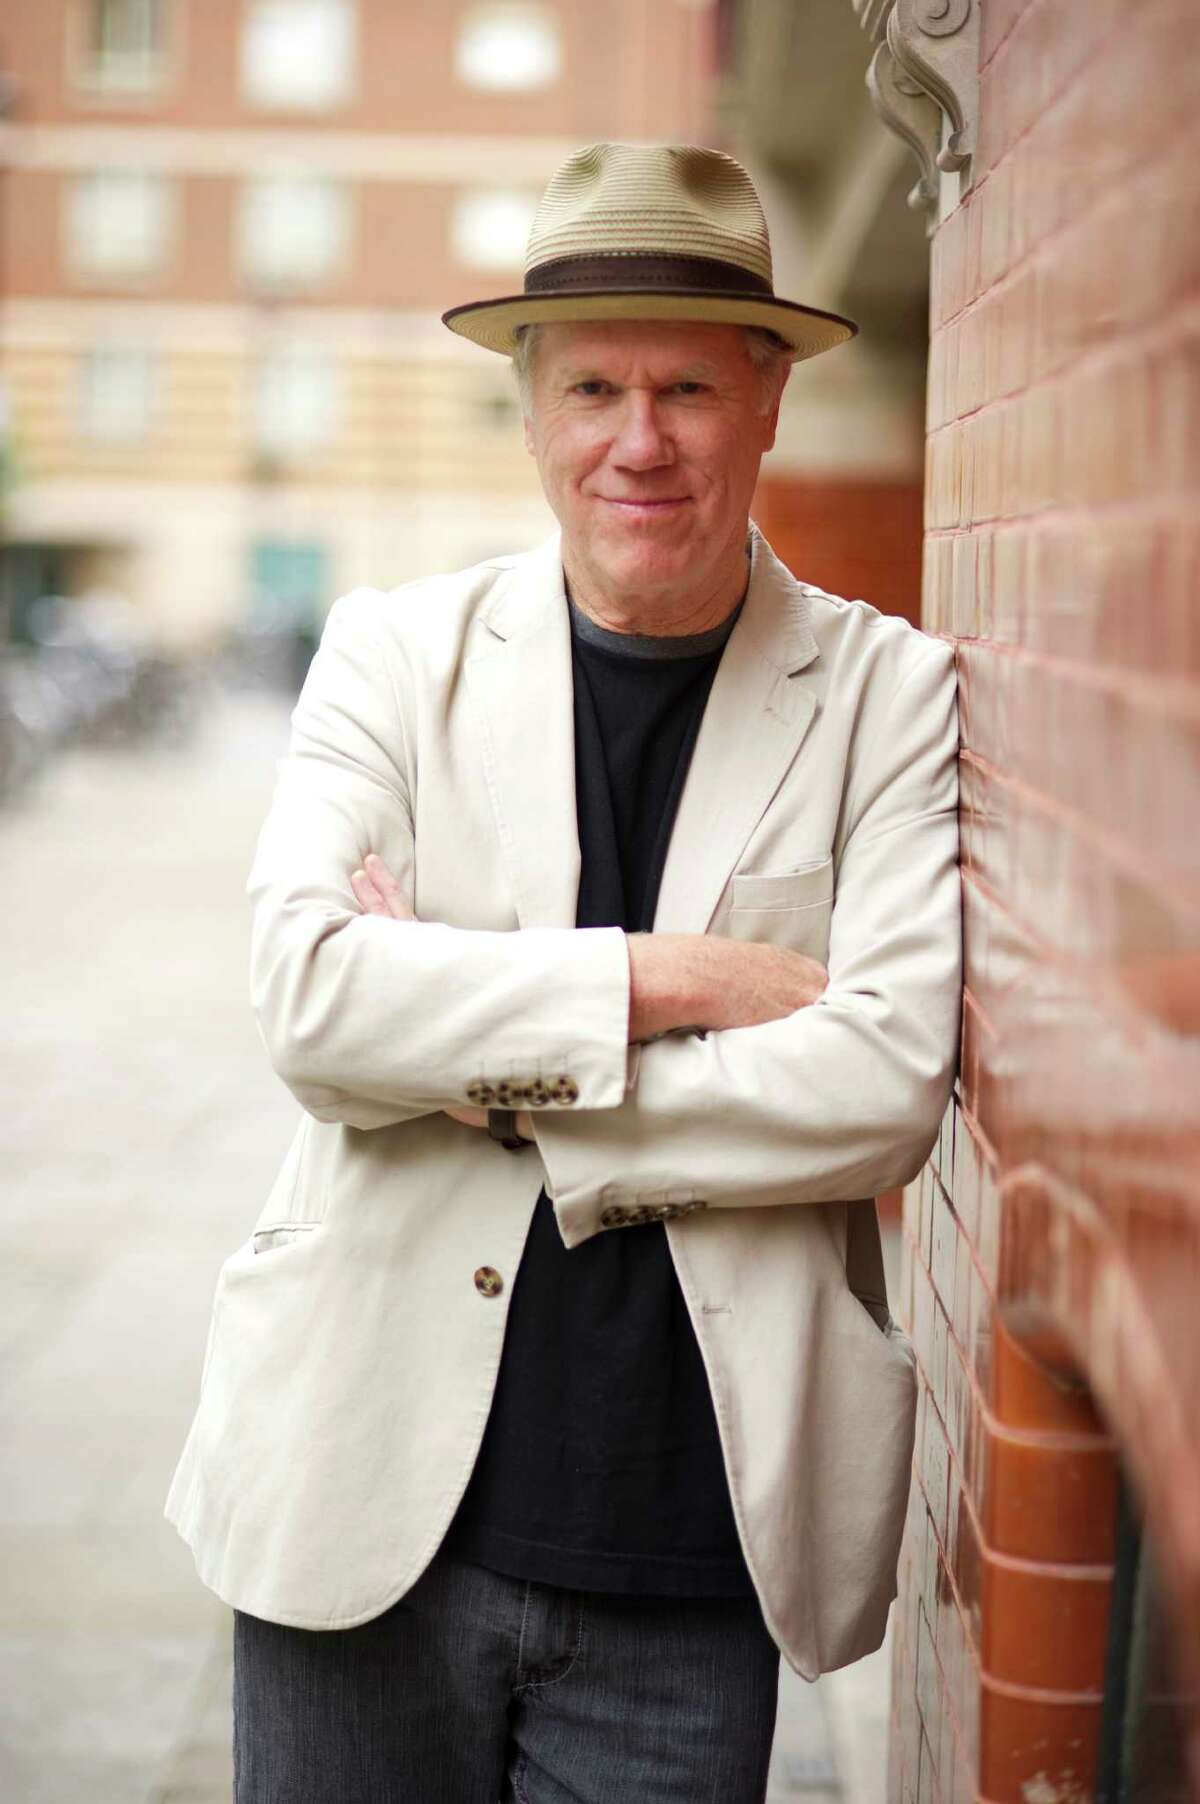 Loudon Wainwright III brings his eccentric sense of humor, oddly grimacing performance style and sometimes growling vocal delivery to The Egg at 8 p.m. Friday. Click here for information. (Ross Halfin)